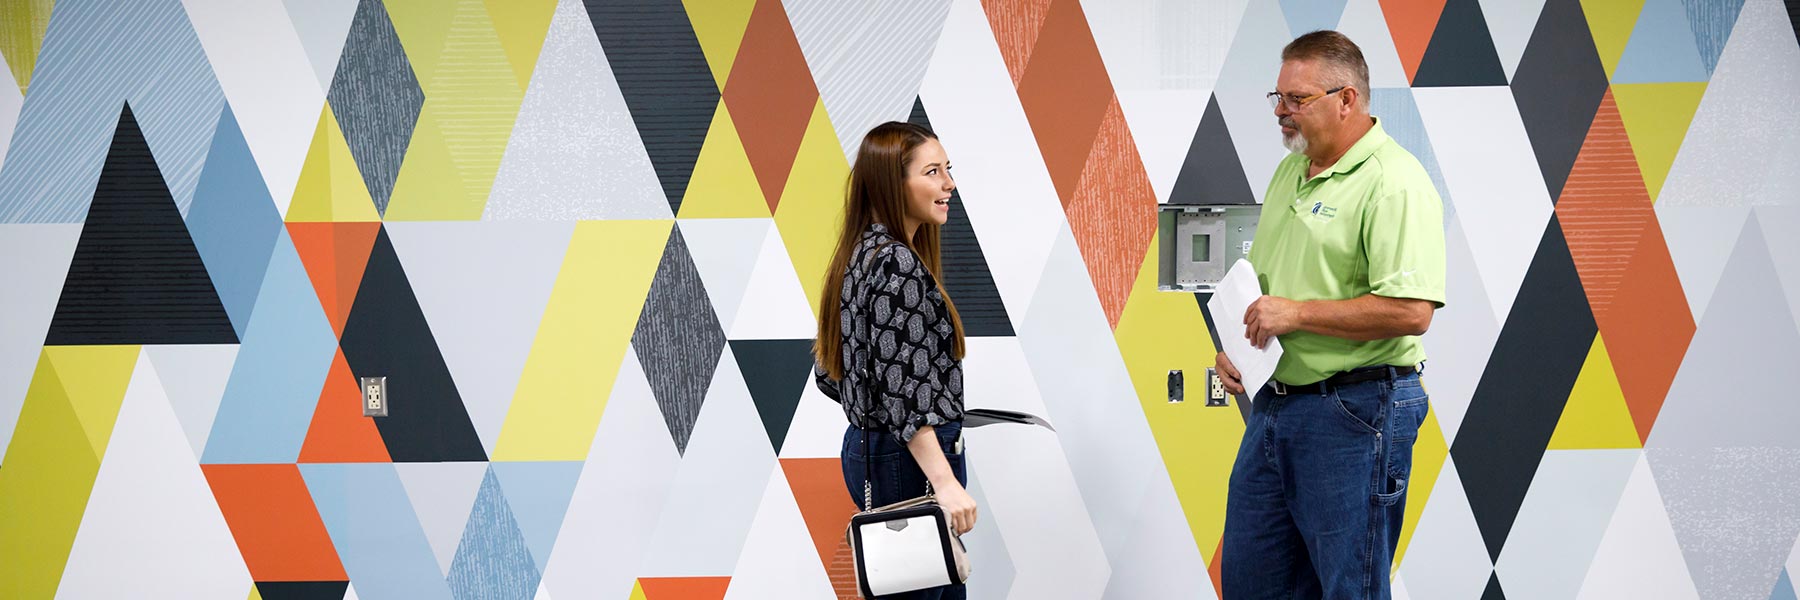 Two people stand in front of a patterned wall.